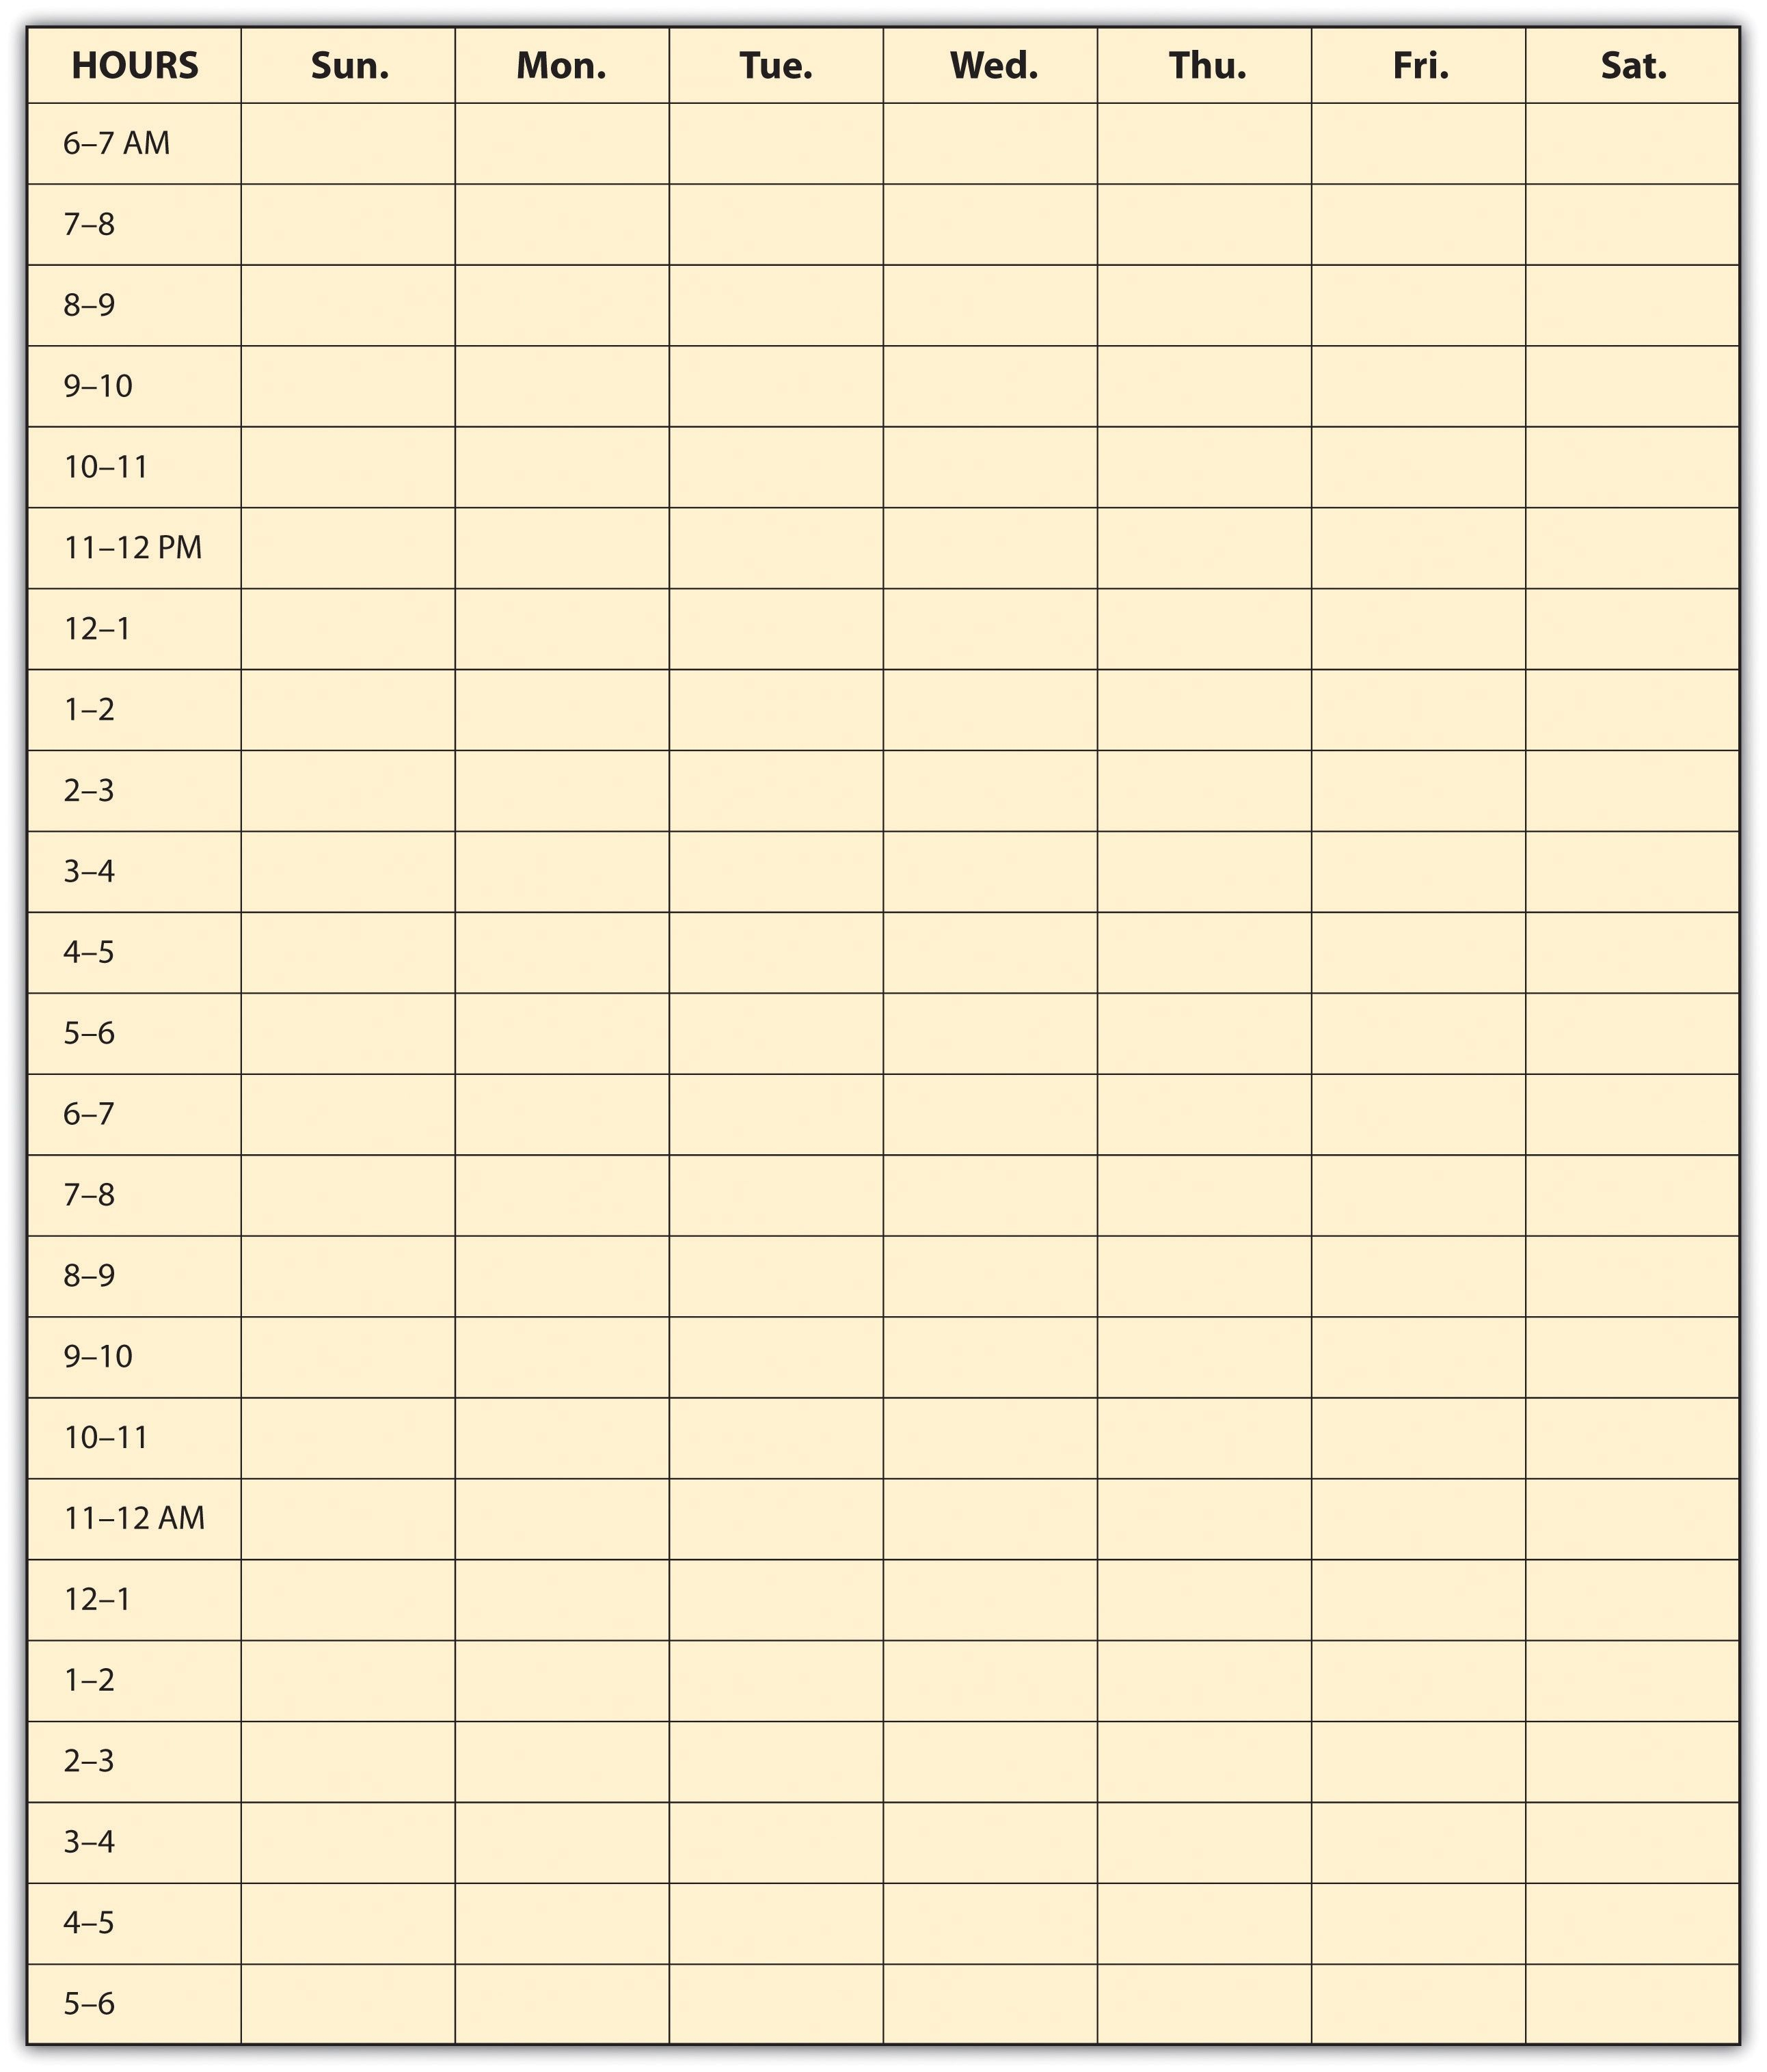 Day Planner With Time Slots Printable Weekly Calendar With for Planner With Time Slots